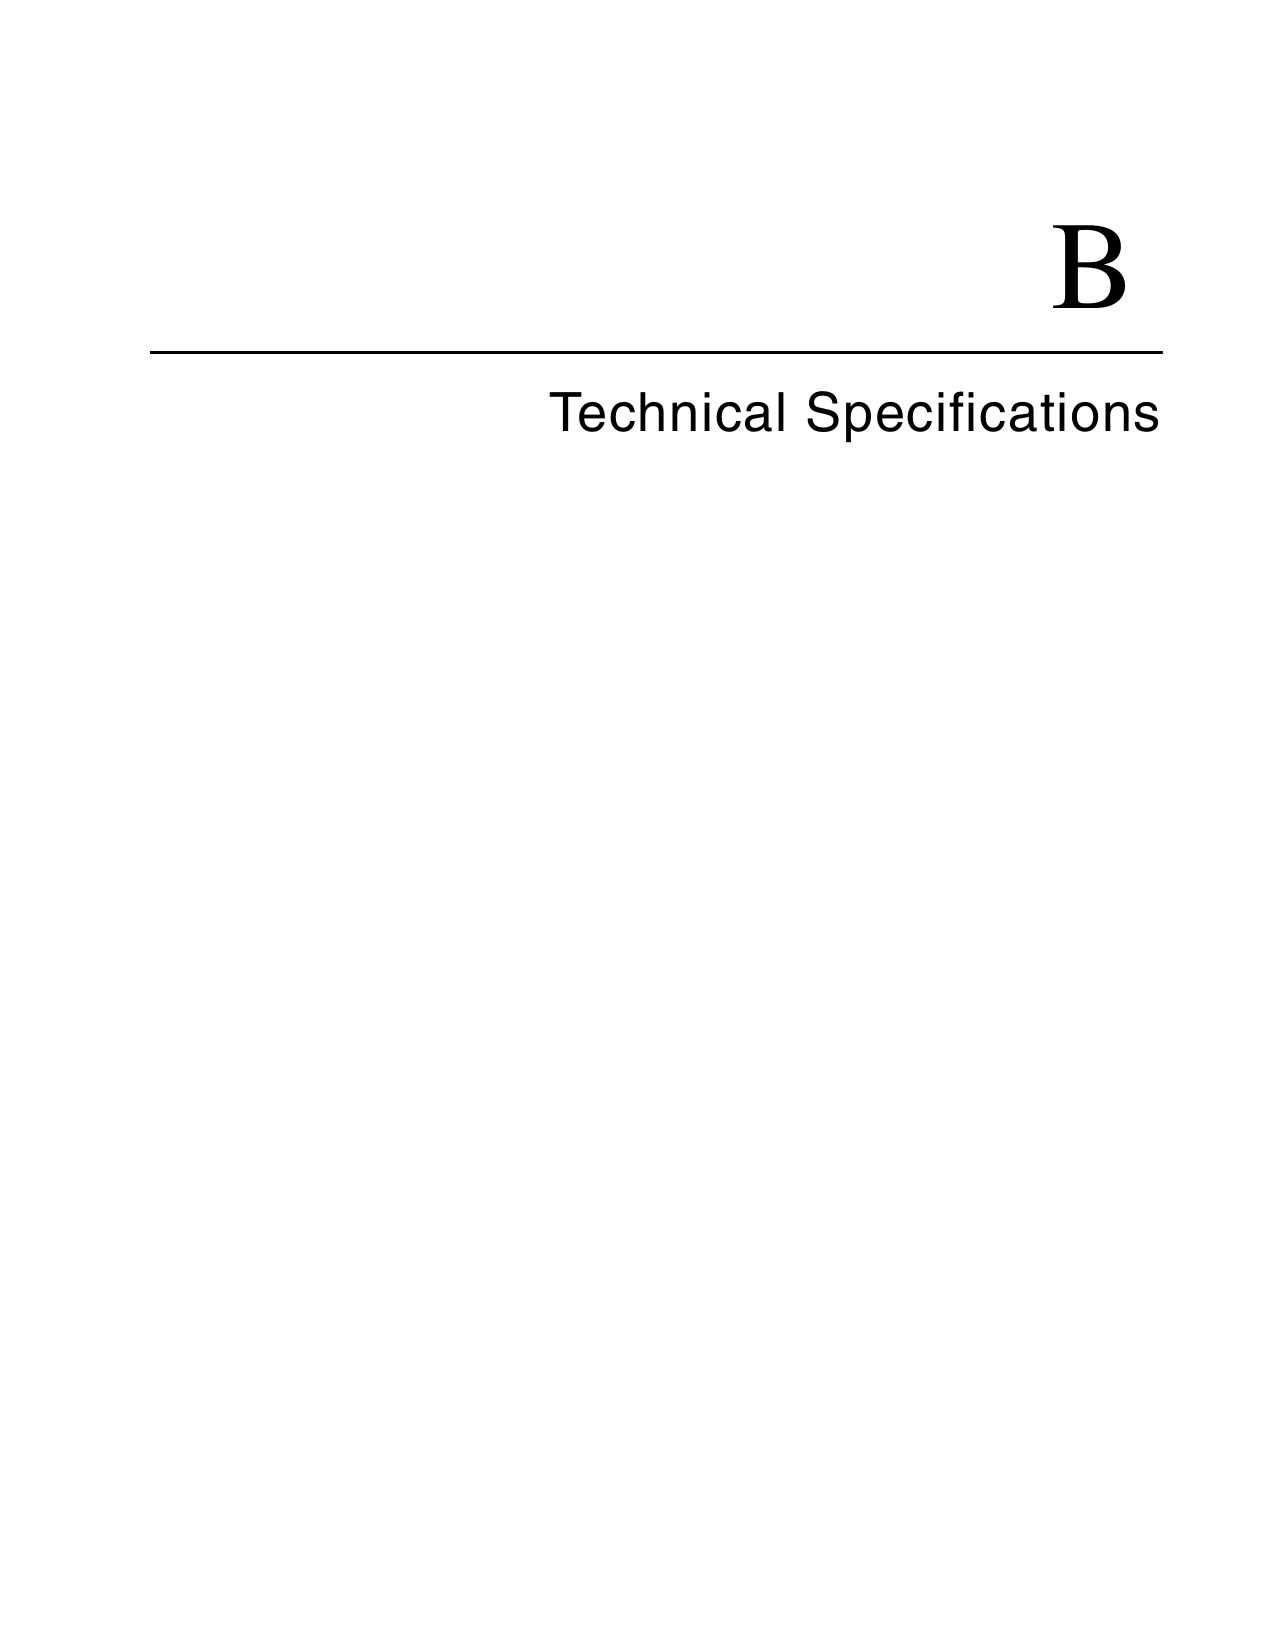 B Technical Specifications